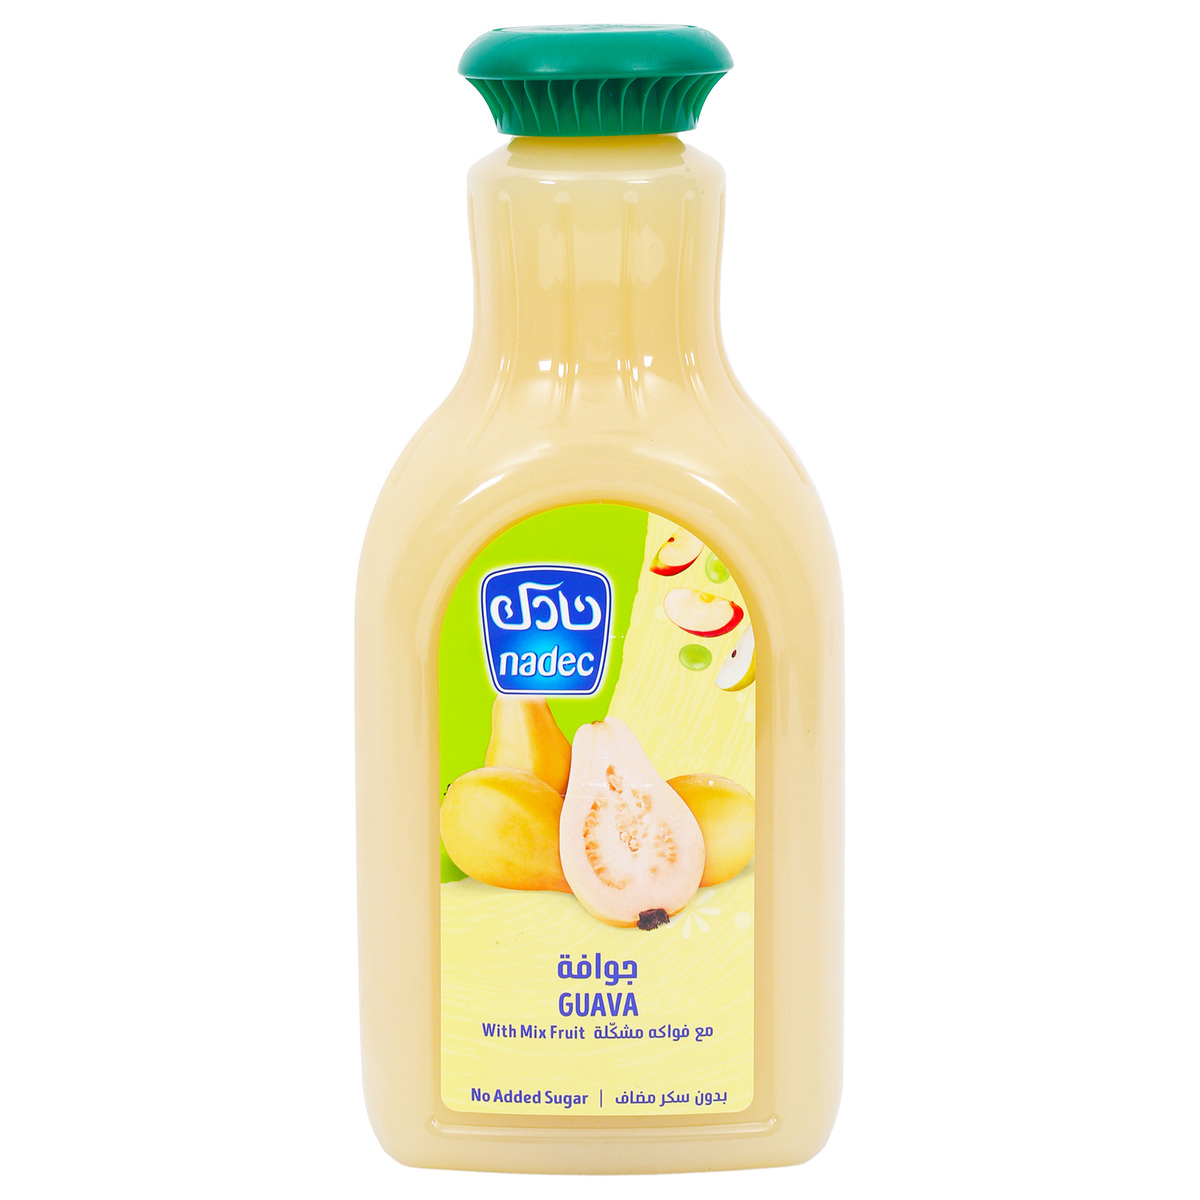 Nadec No Added Sugar Guava With Mix Fruit Juice 1.3 Litres